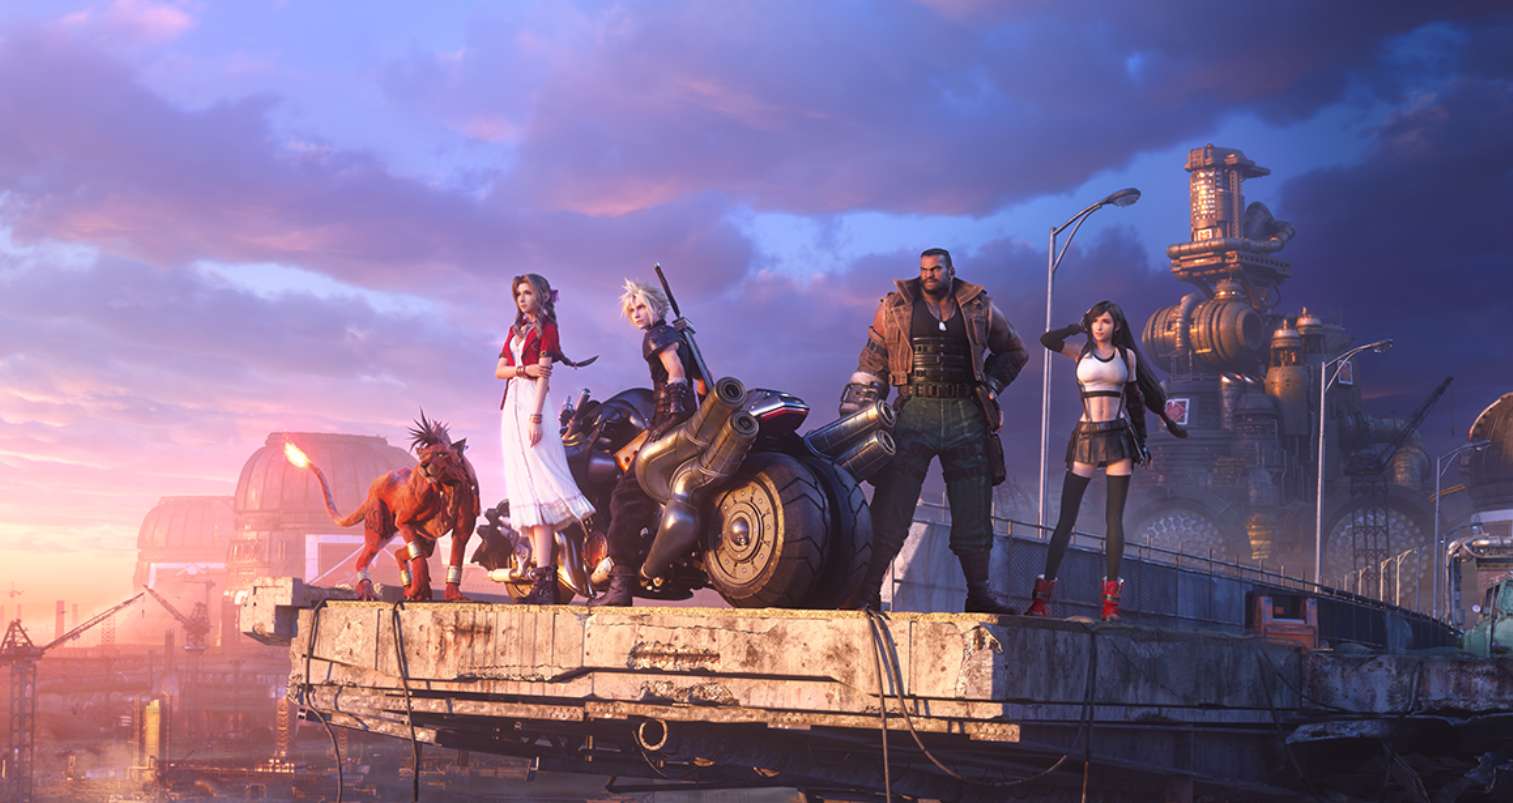 Final Fantasy VII Remake Image Reveals The Full Team Together For The First Time